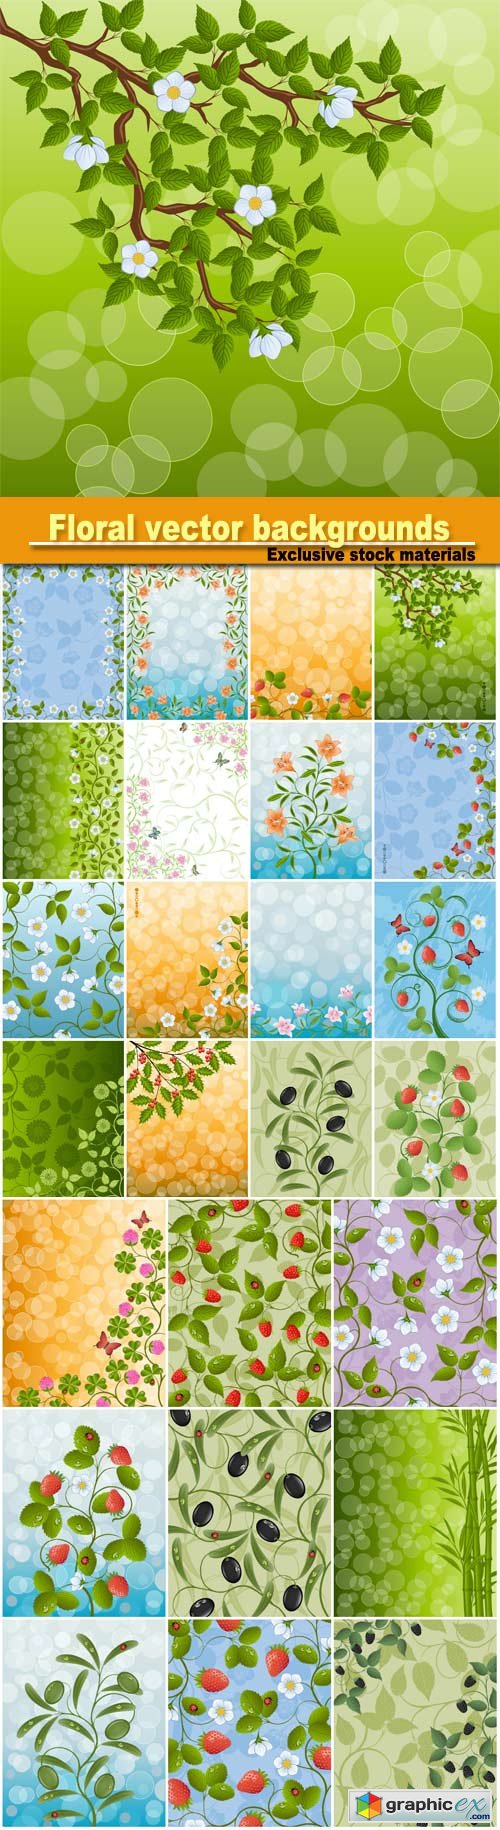 Vector background with flowers and berries